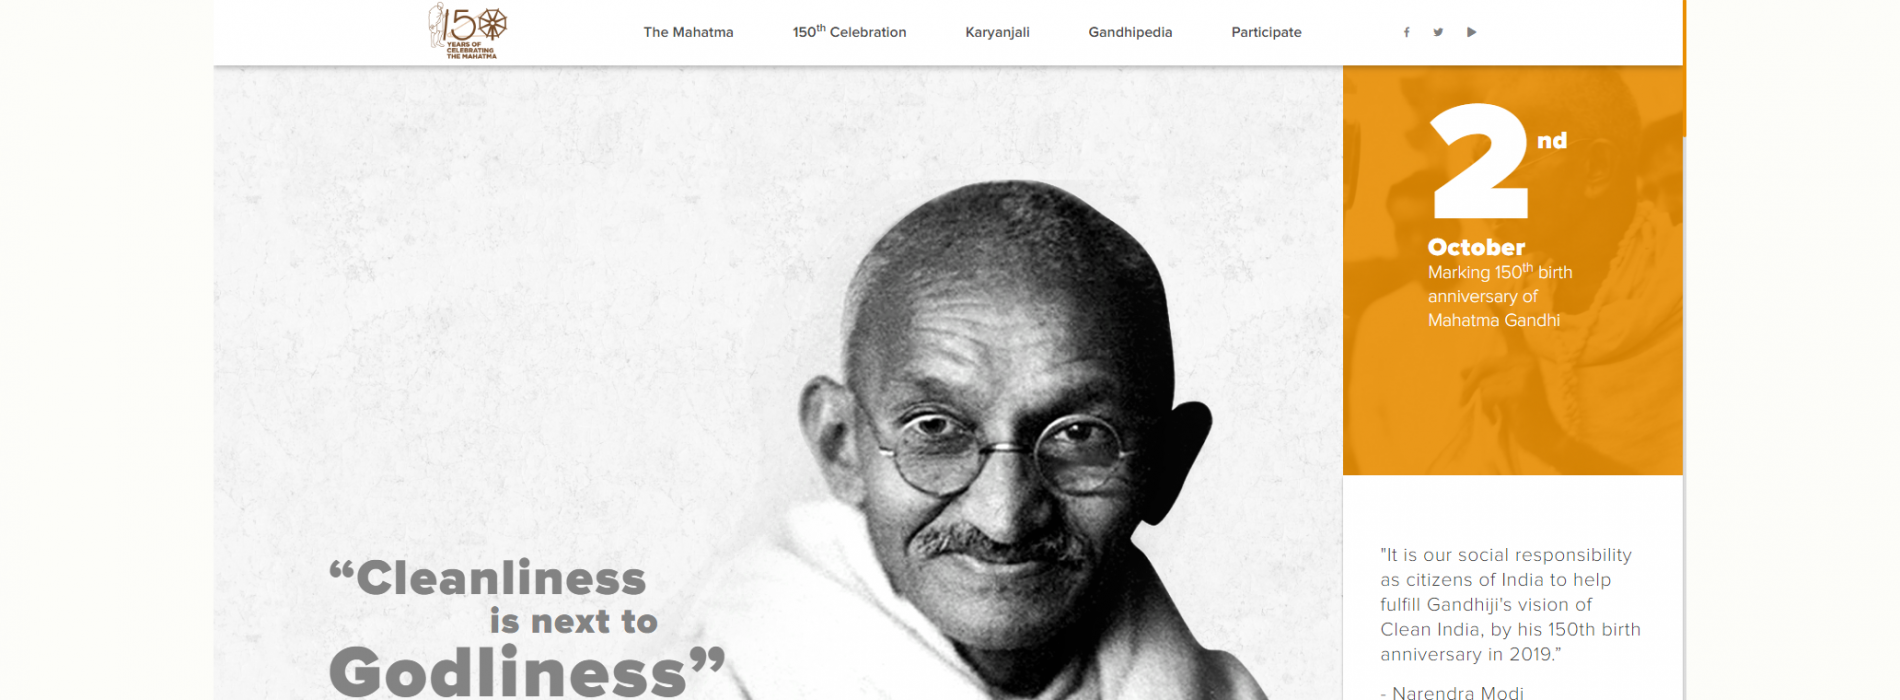 President of India launches the logo and web portal to commemorate 150th birth anniversary of Mahatma Gandhi